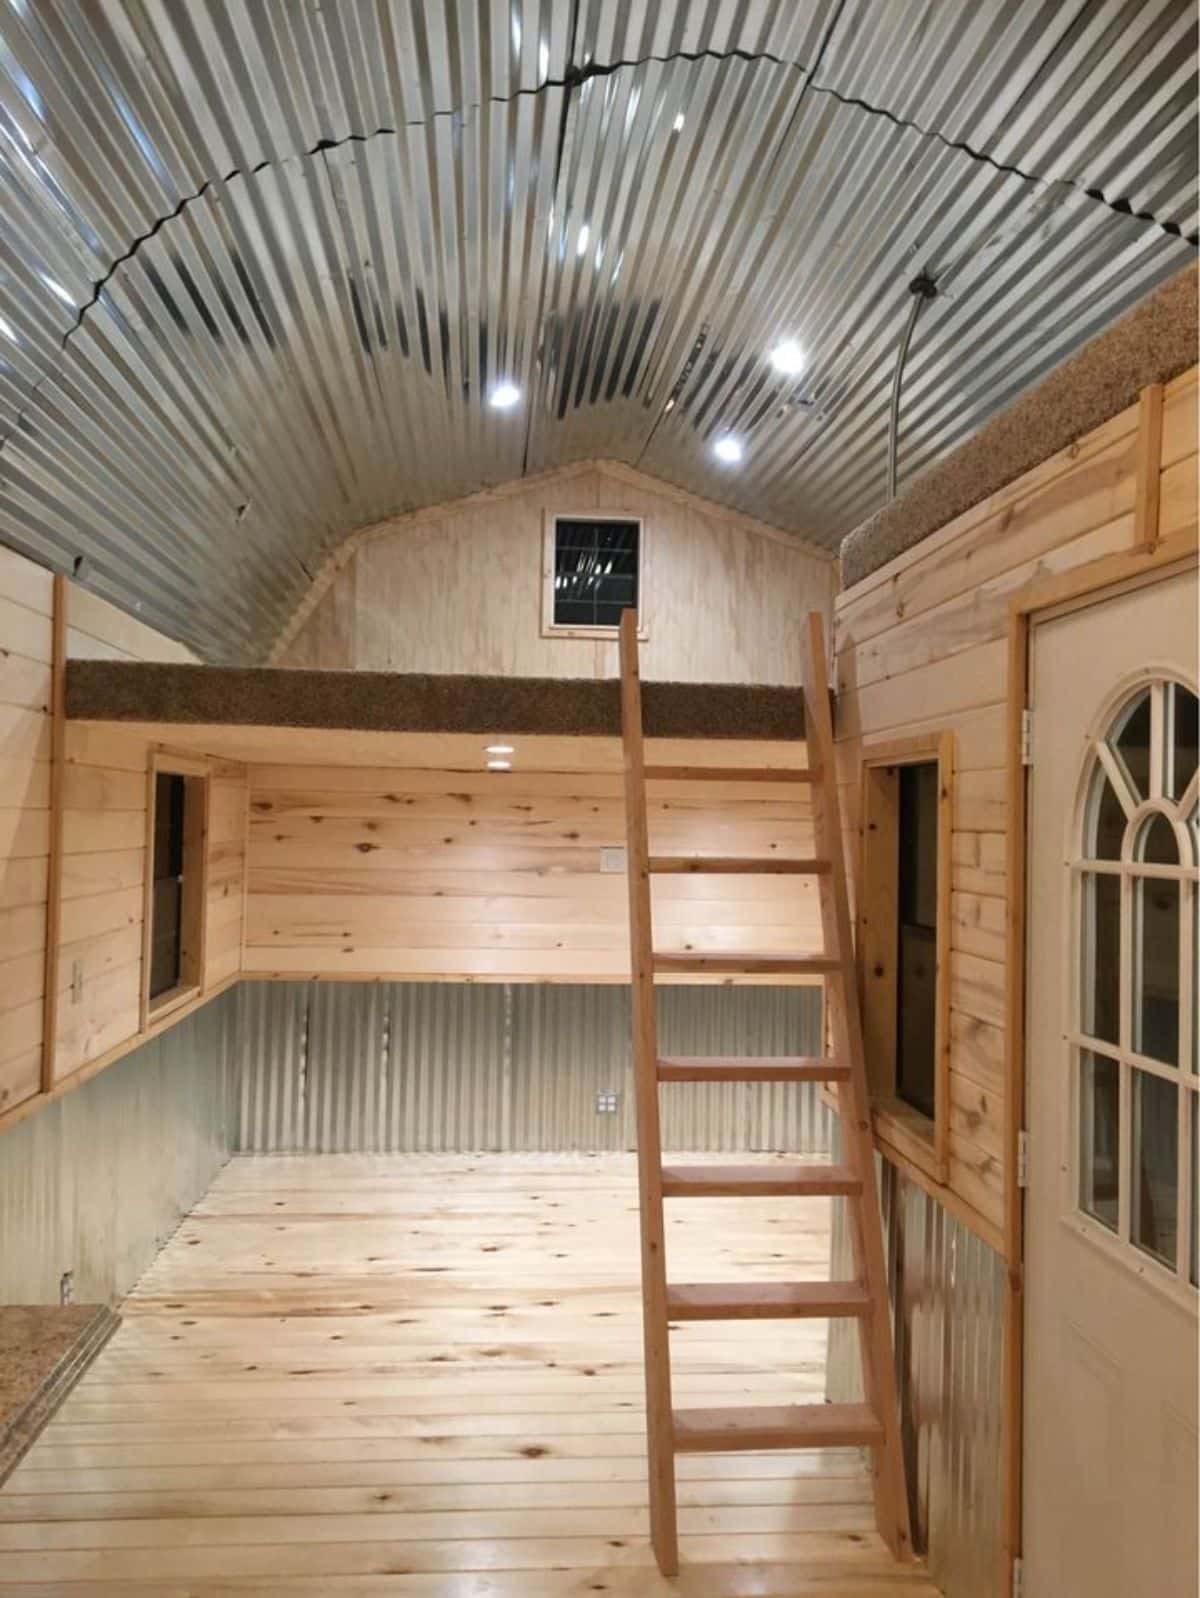 loft 1 is above the living area of $55k double lofted tiny home